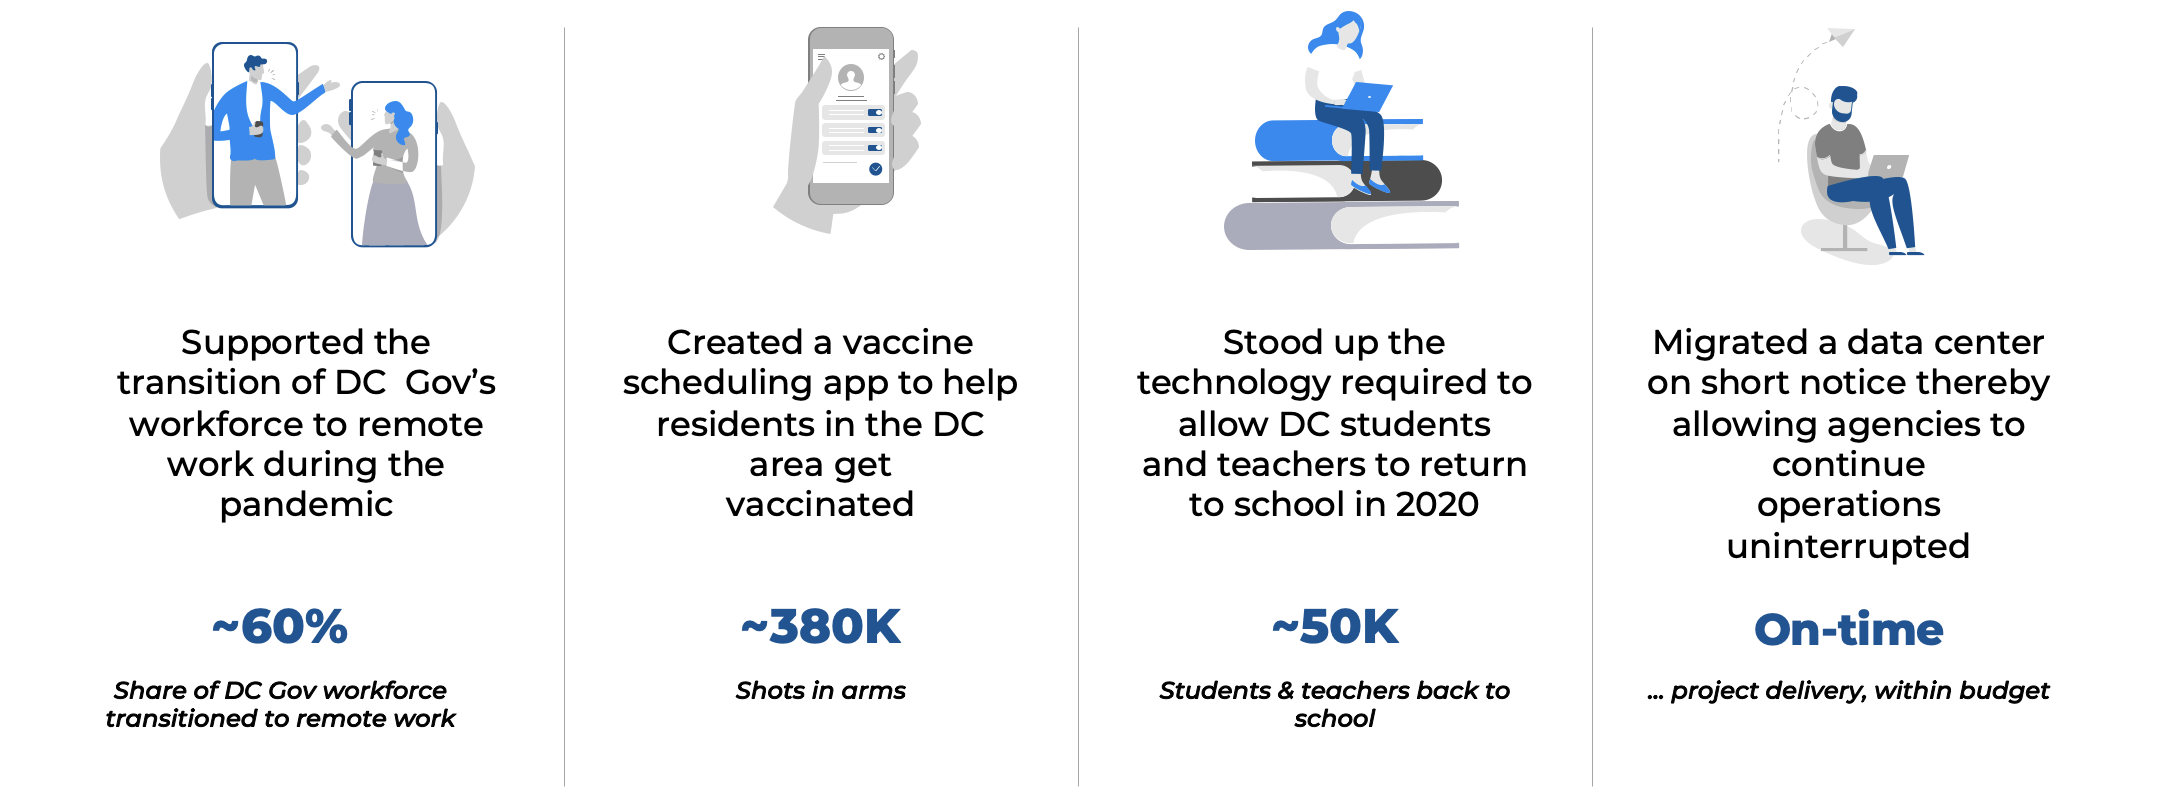 Supported the transition of DC  Gov’s workforce to remote work during the pandemic, Created a vaccine scheduling app to help residents in the DC area get vaccinated, Stood up the technology required to allow DC students and teachers to return to school in 2020, Migrated a data center on short notice thereby allowing agencies to continue operations uninterrupted